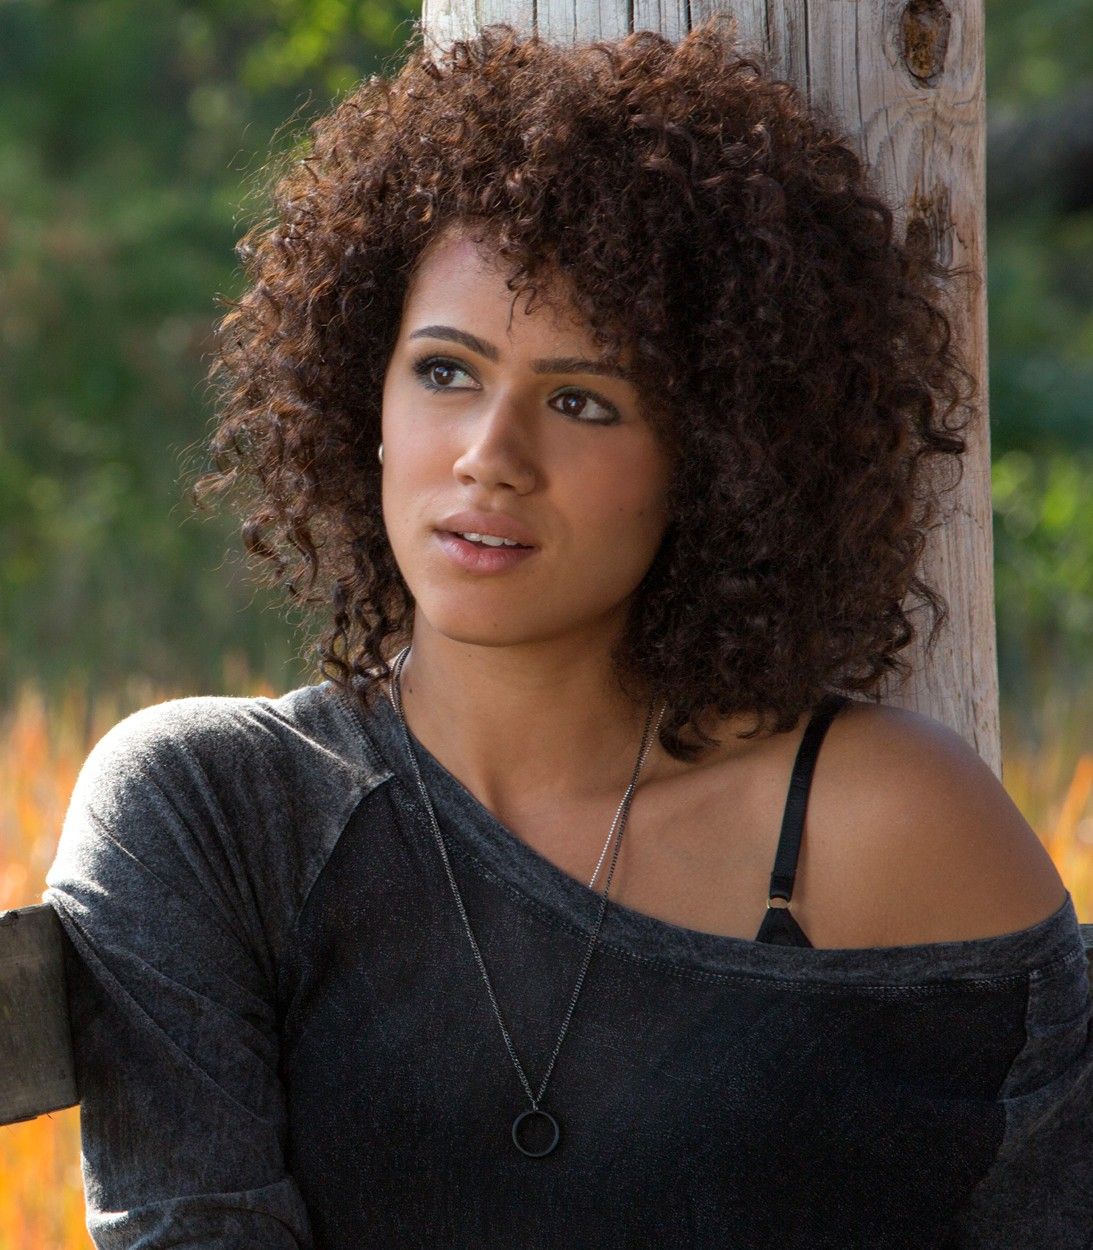 Nathalie Emmanuel in Fast and Furious 7 Vertical